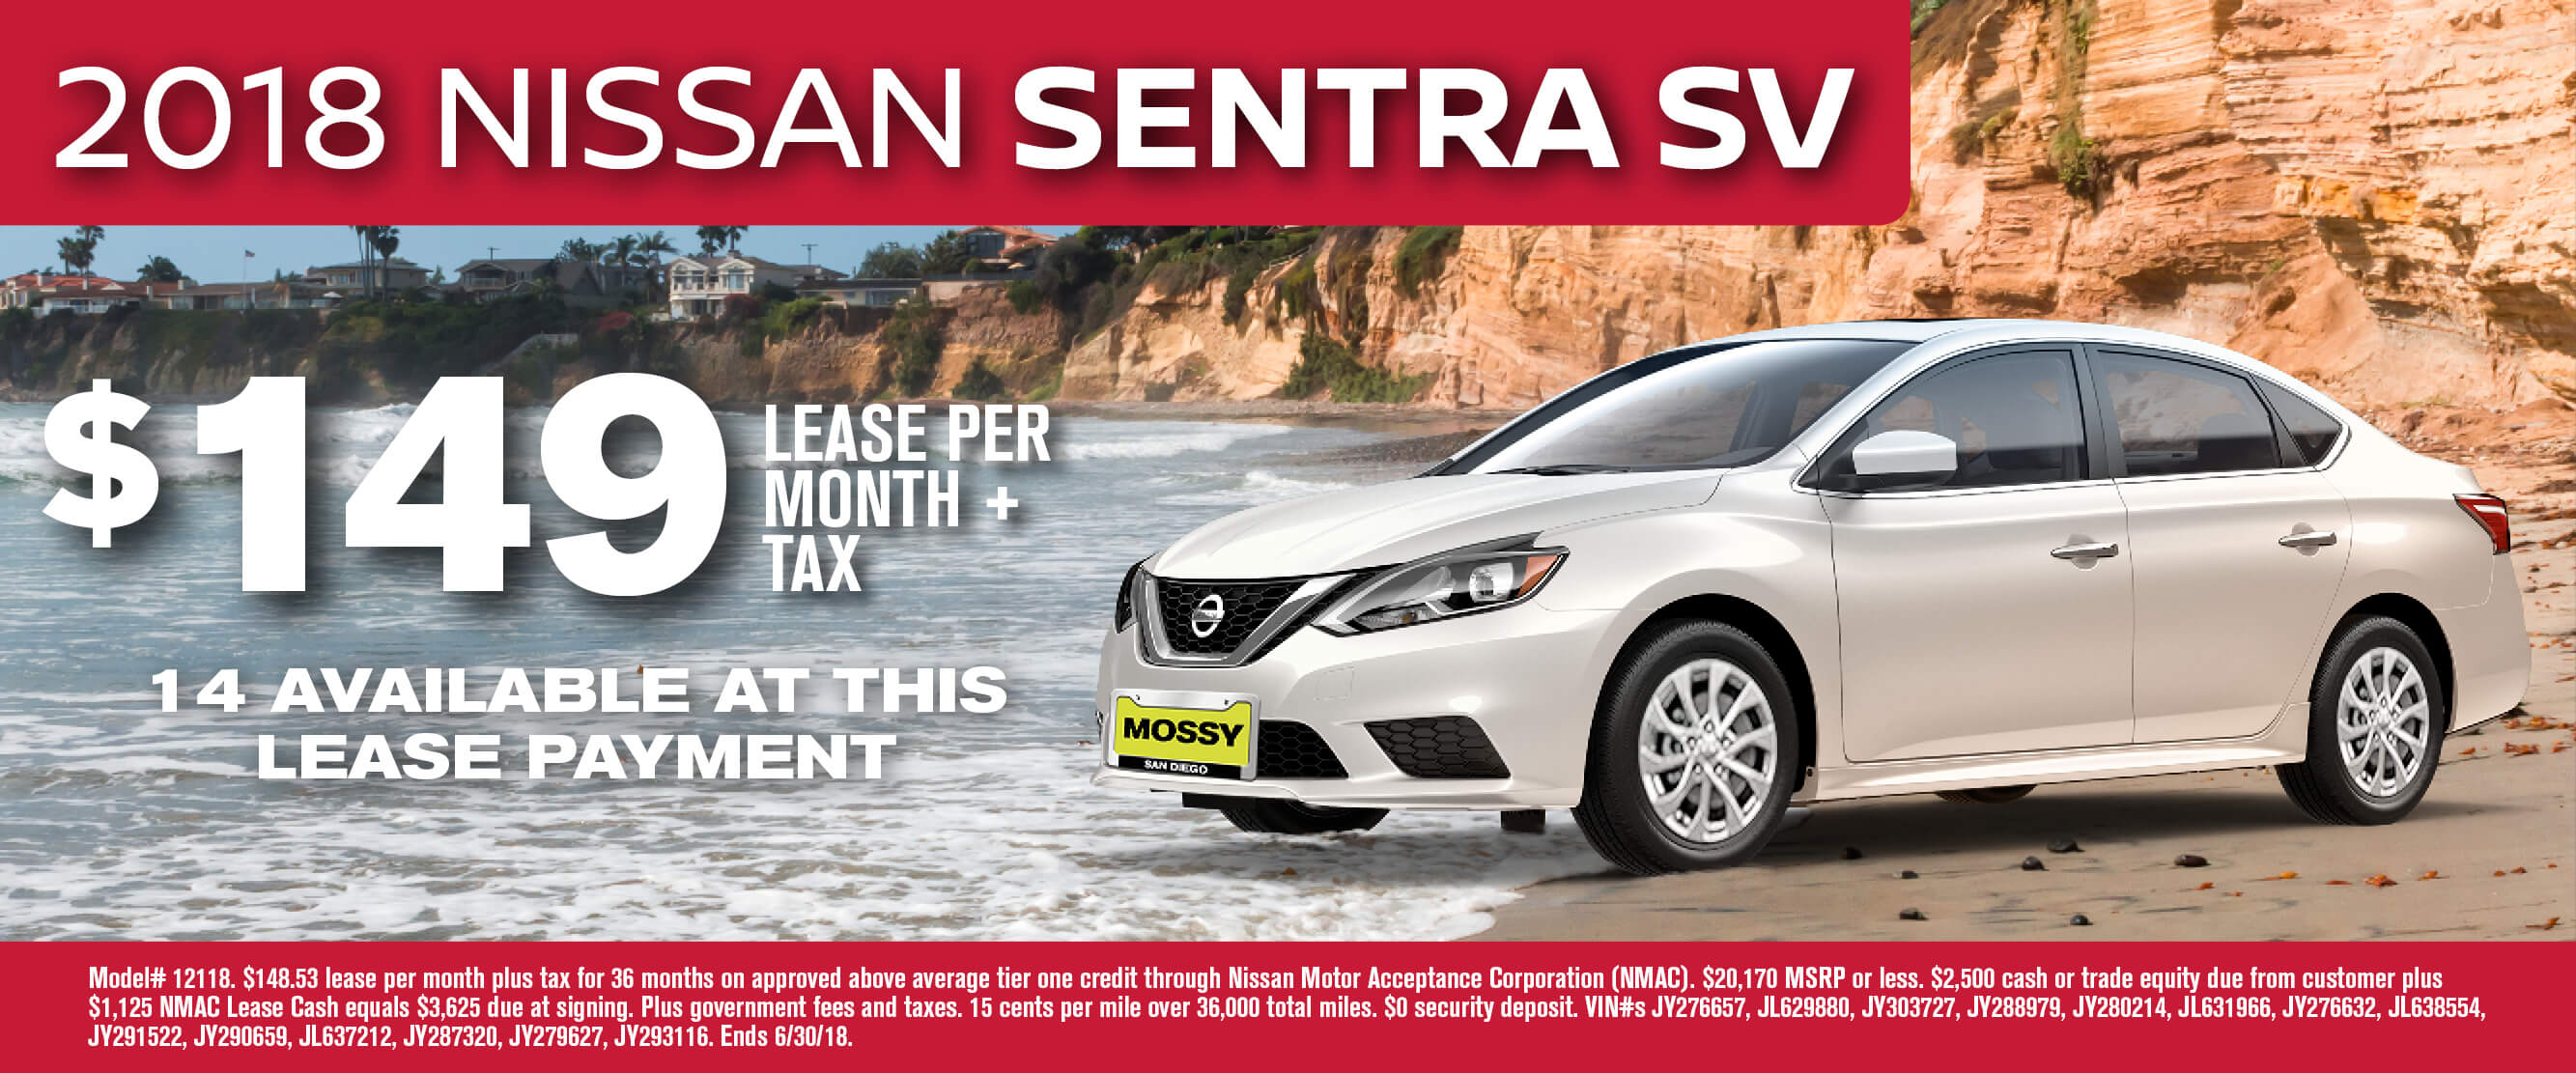 2018 nissan sentra sv $149 lease per month + tax